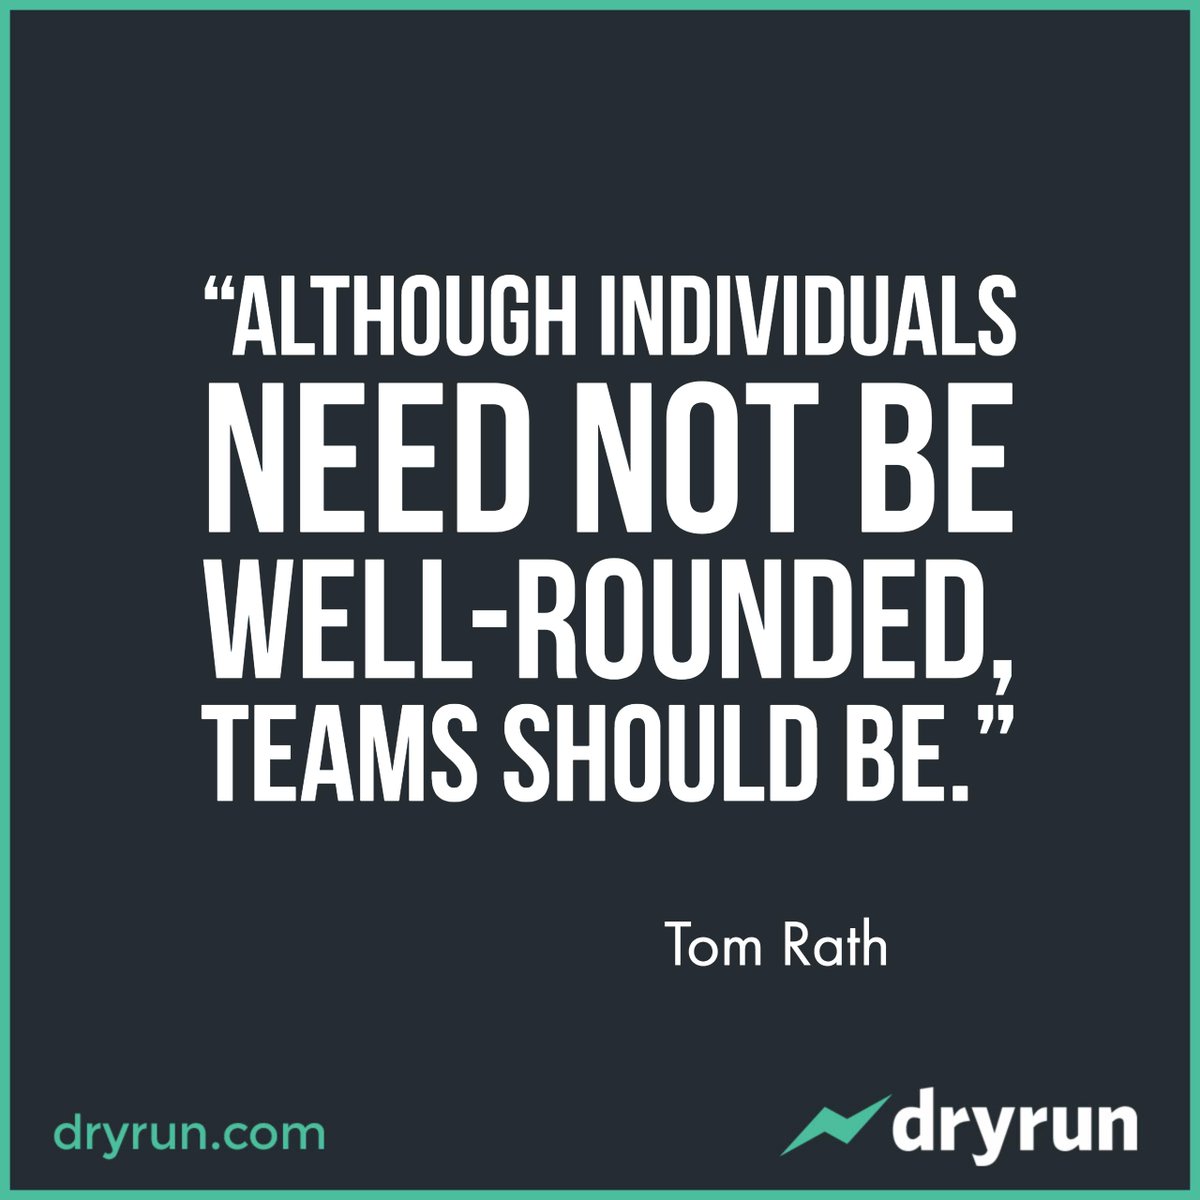 When there is effective collaboration through a well-rounded team, wonderful things can be achieved. 

 #motivation #businessquotes #inspiration #quoteoftheday  #smallbusiness #entrepreneur  #entrepreneurmindset #smallbiz #businessowner #startuplife #saas #yeg #yegbusiness